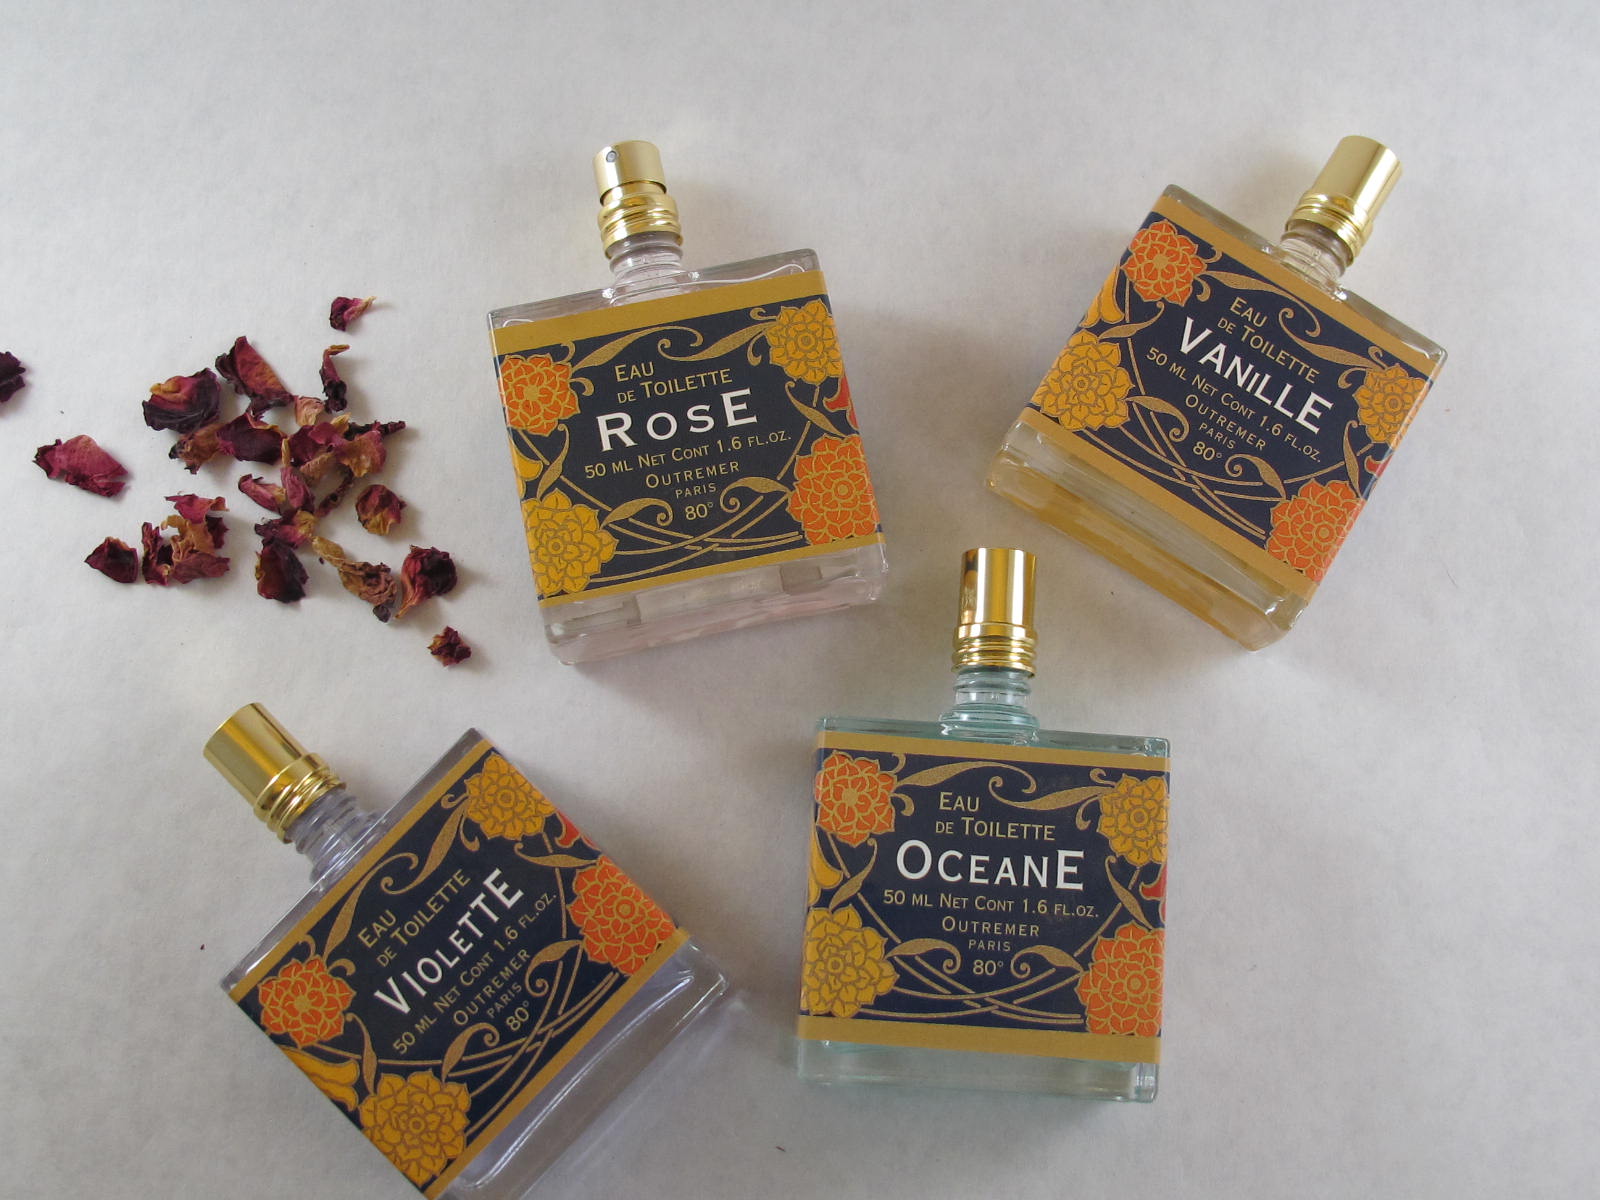 Bottles of fragrance by French perfumer Outremer